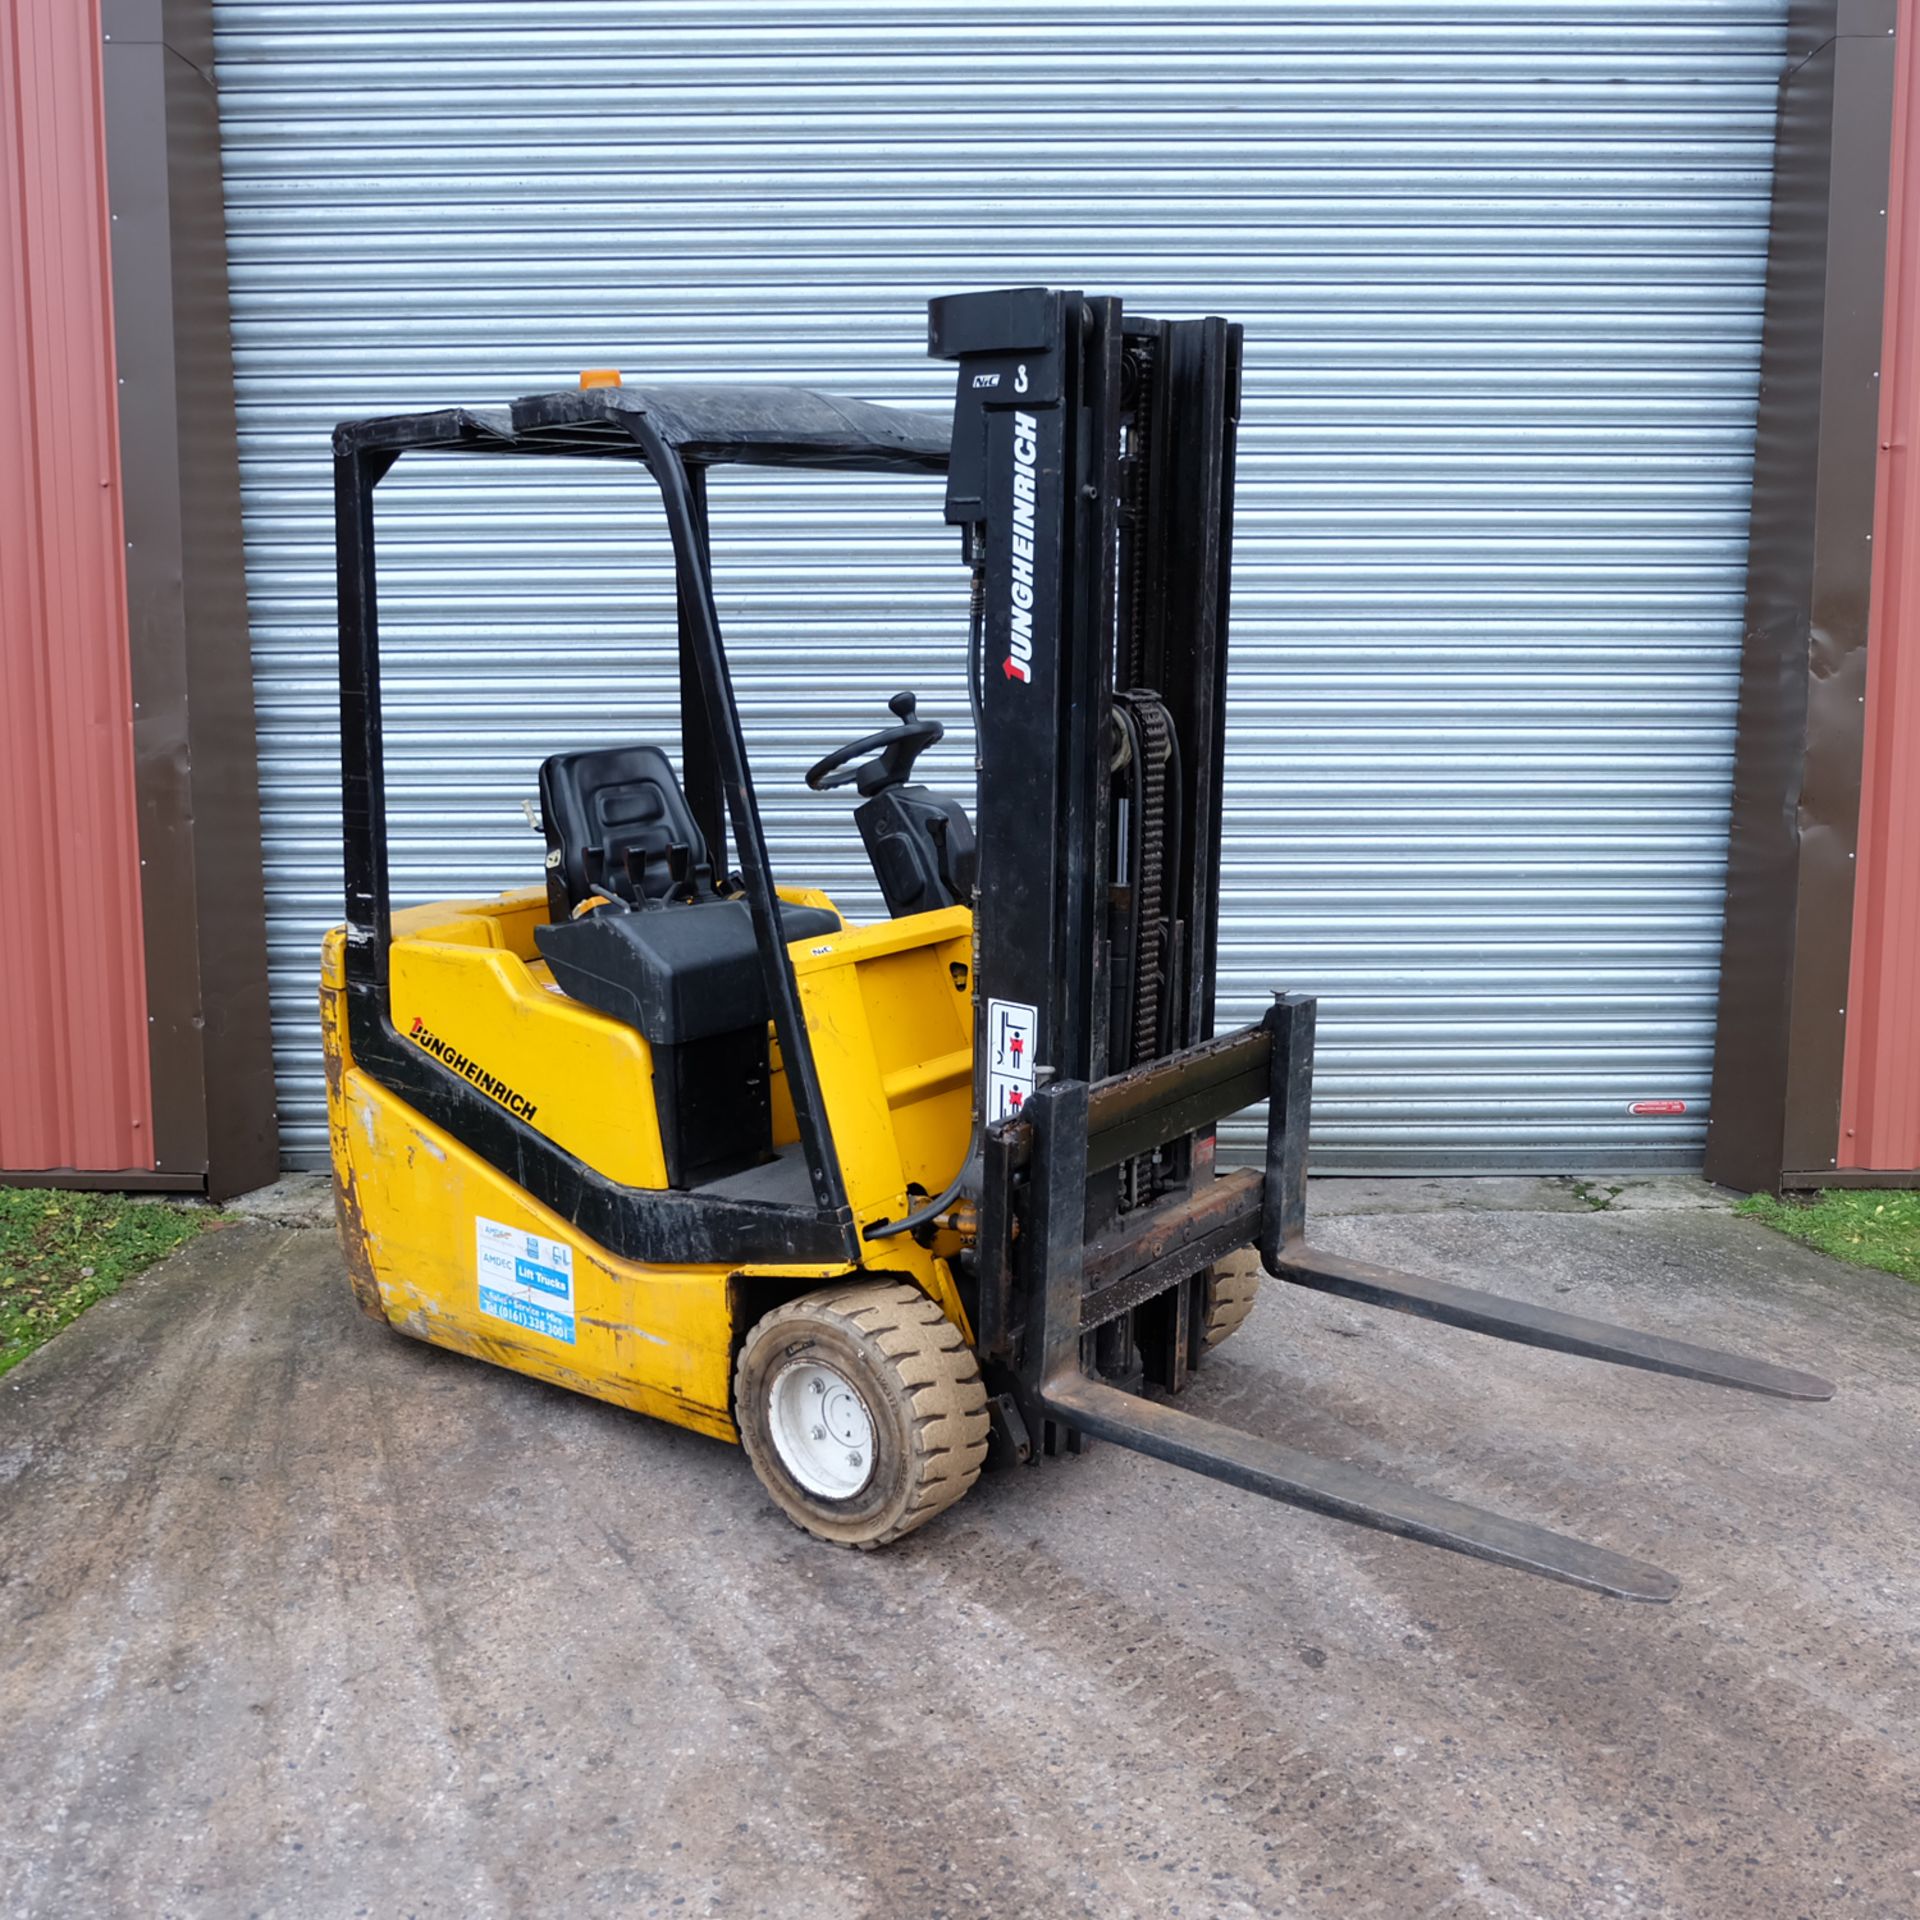 Jungheinrich 1800kg 3 Wheel Electric Forklift Truck with Charger. (1997)